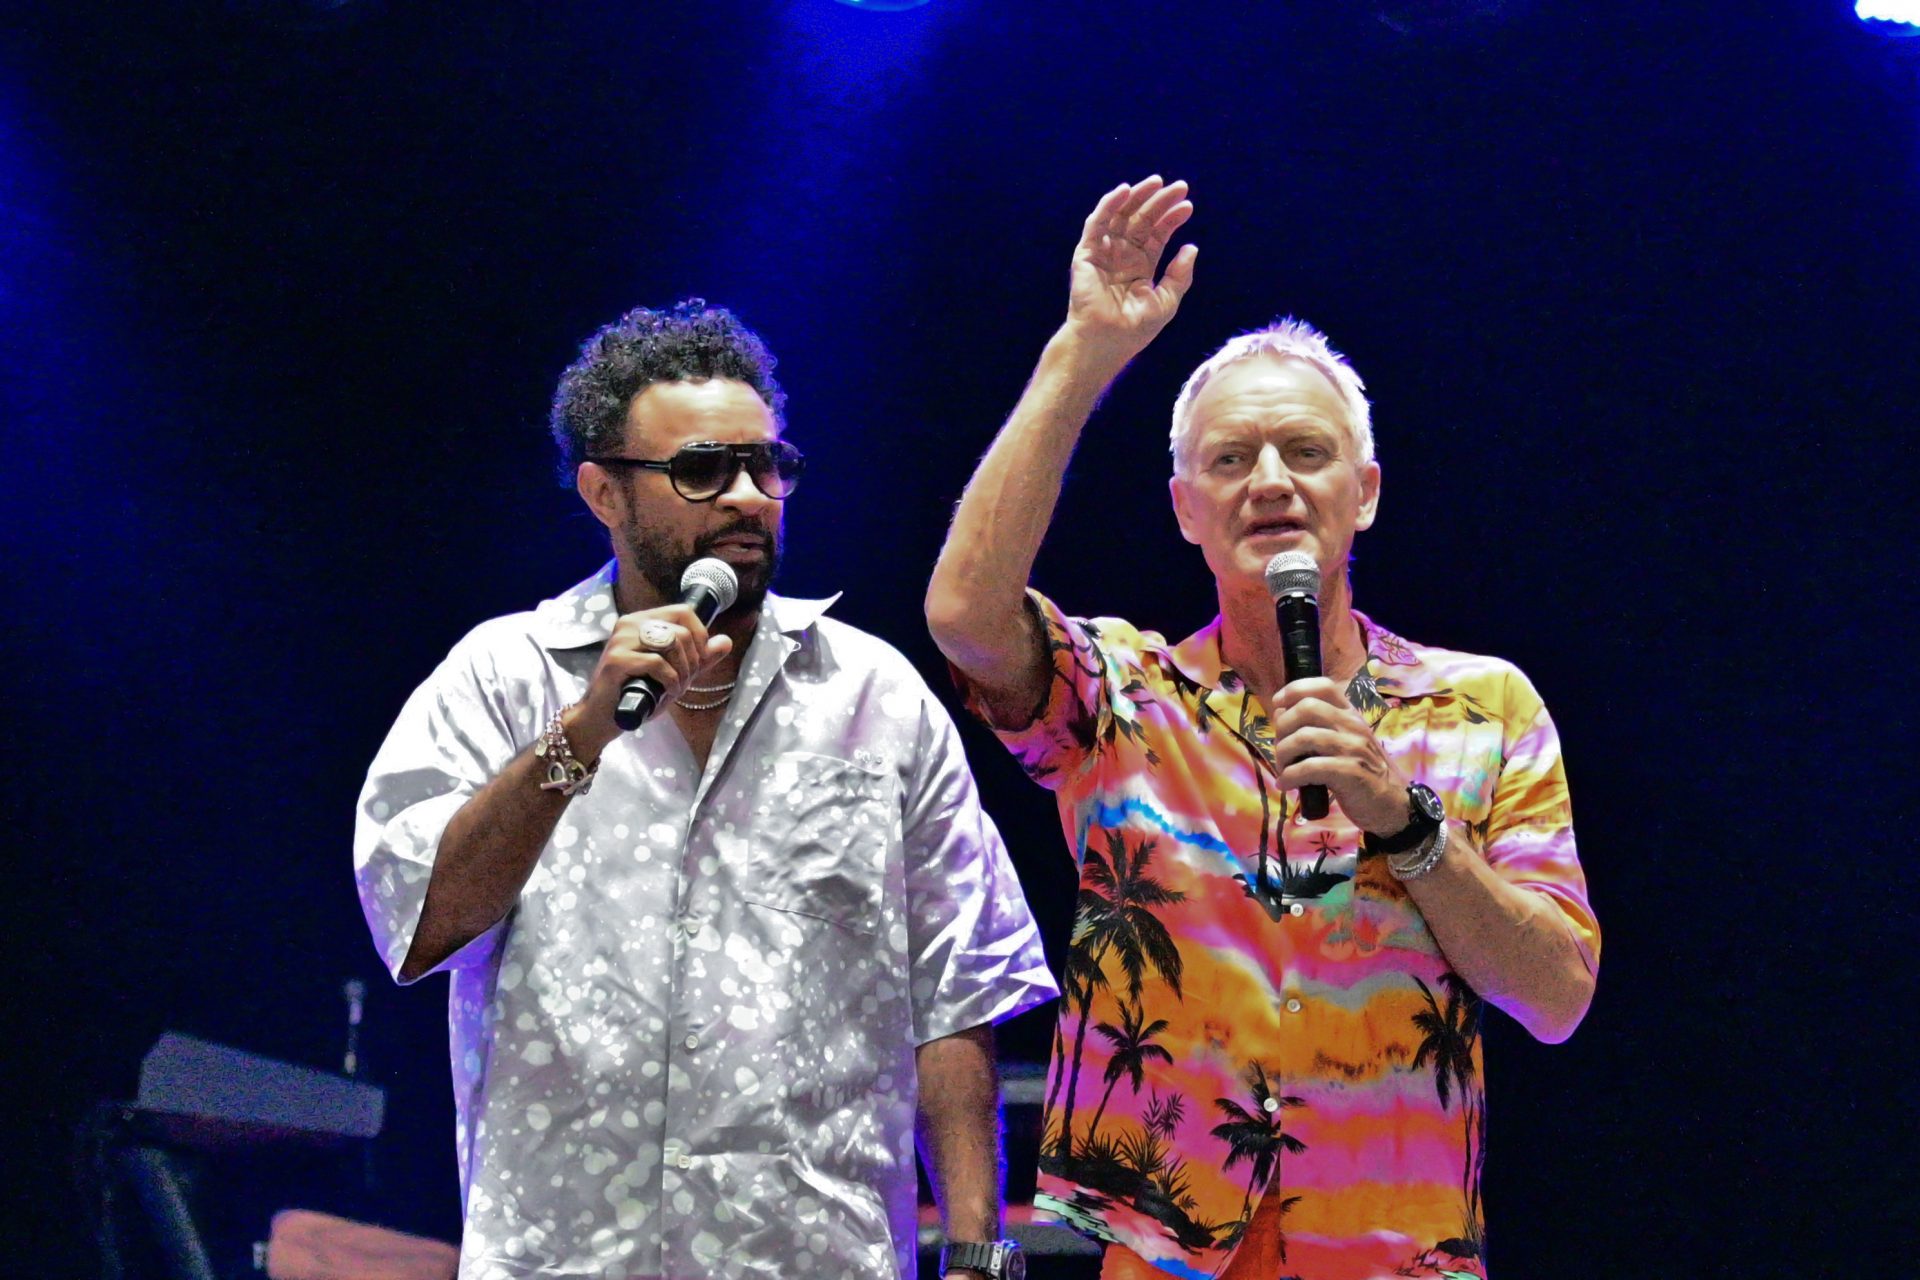 Burrell and Sting collaborated on the album ‘44/876’ in 2018